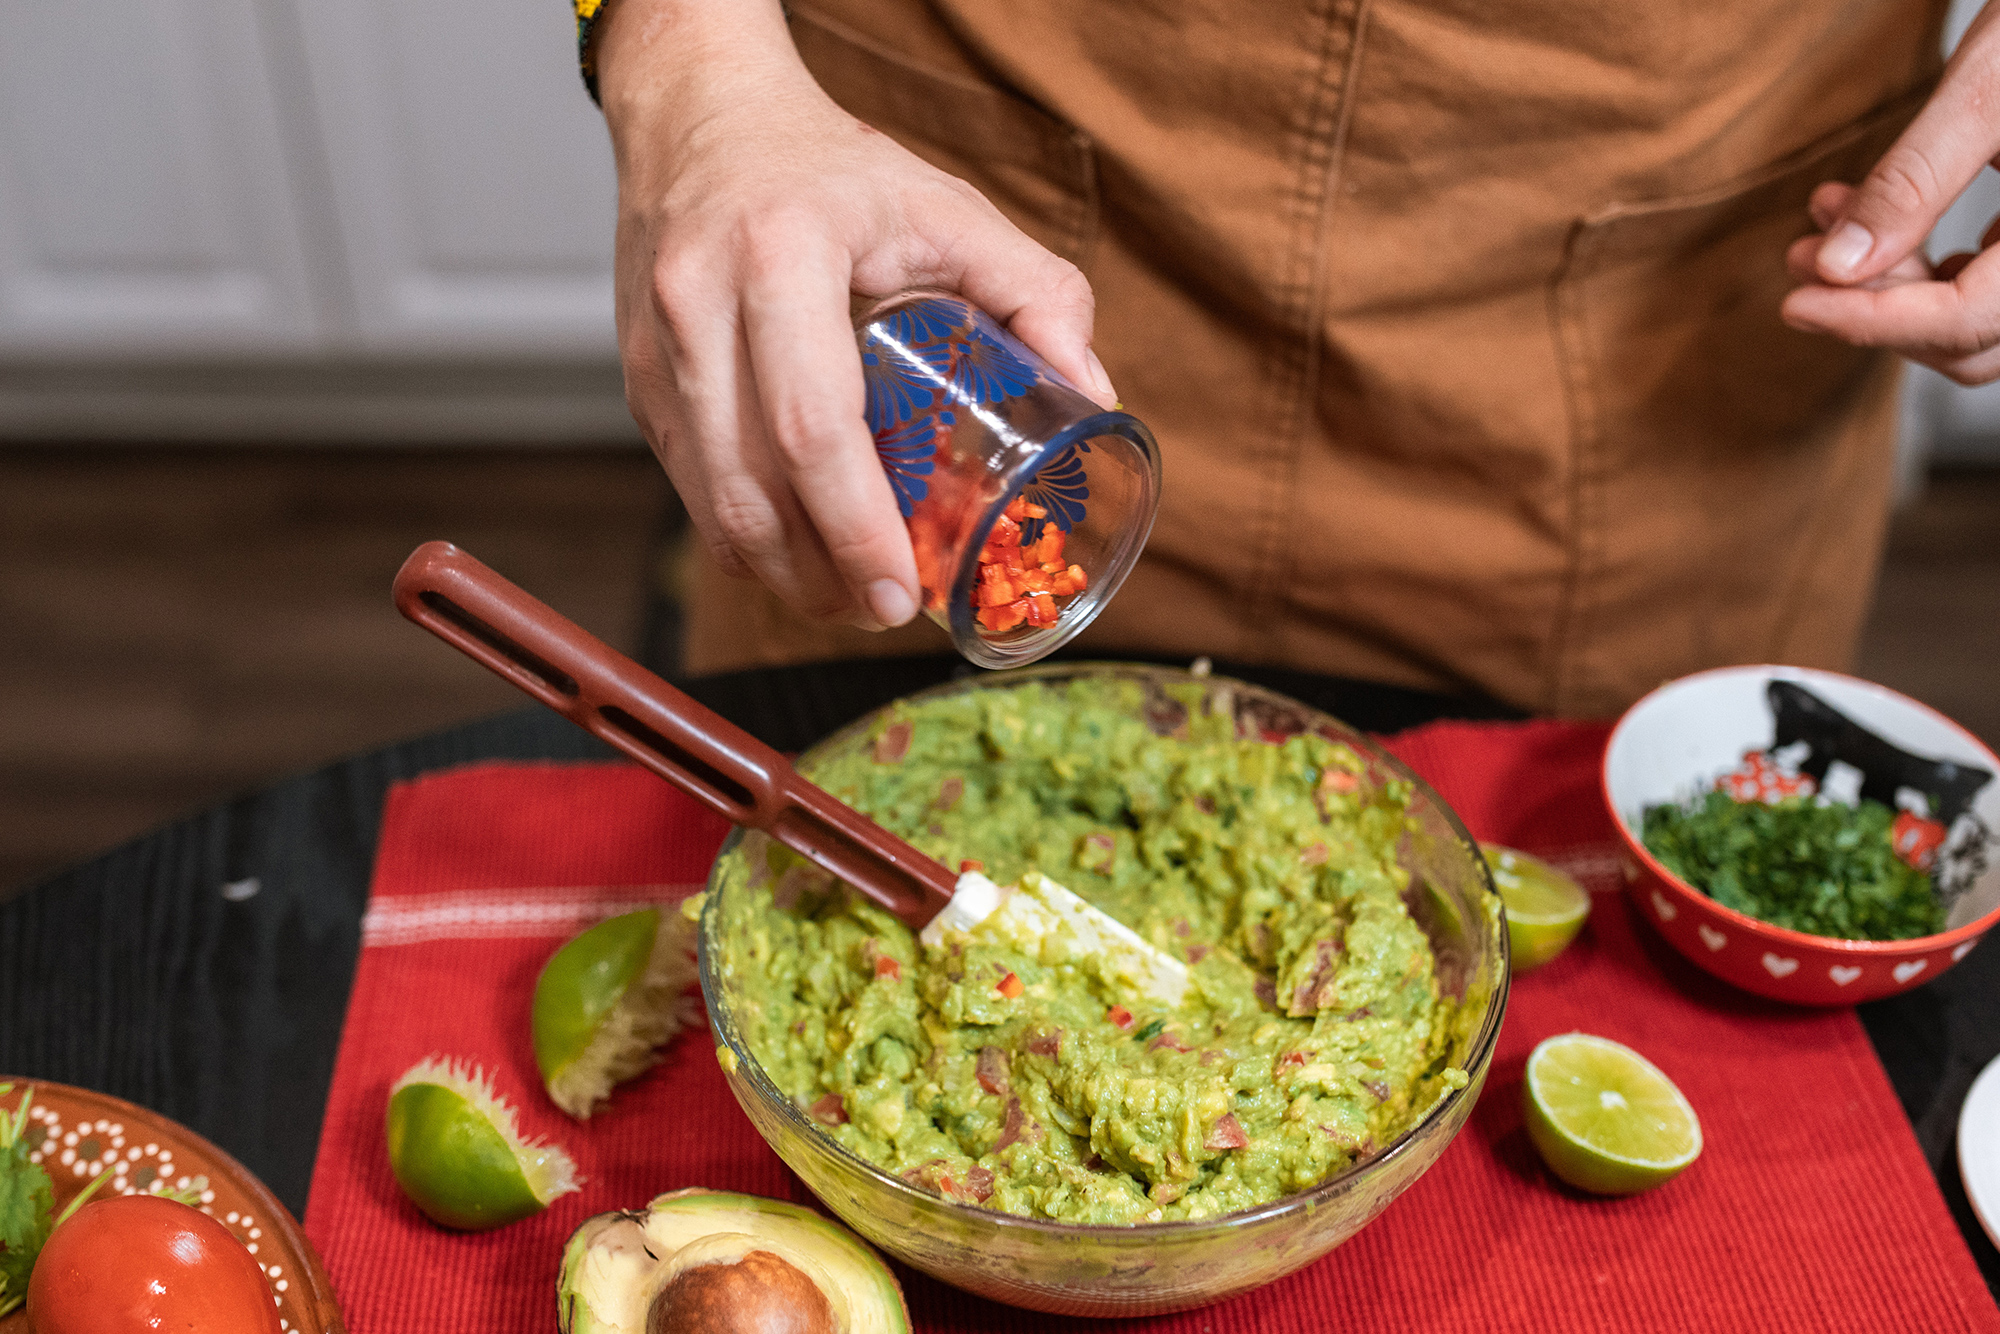 Person making guacamole with ingredients surrounding the bowl